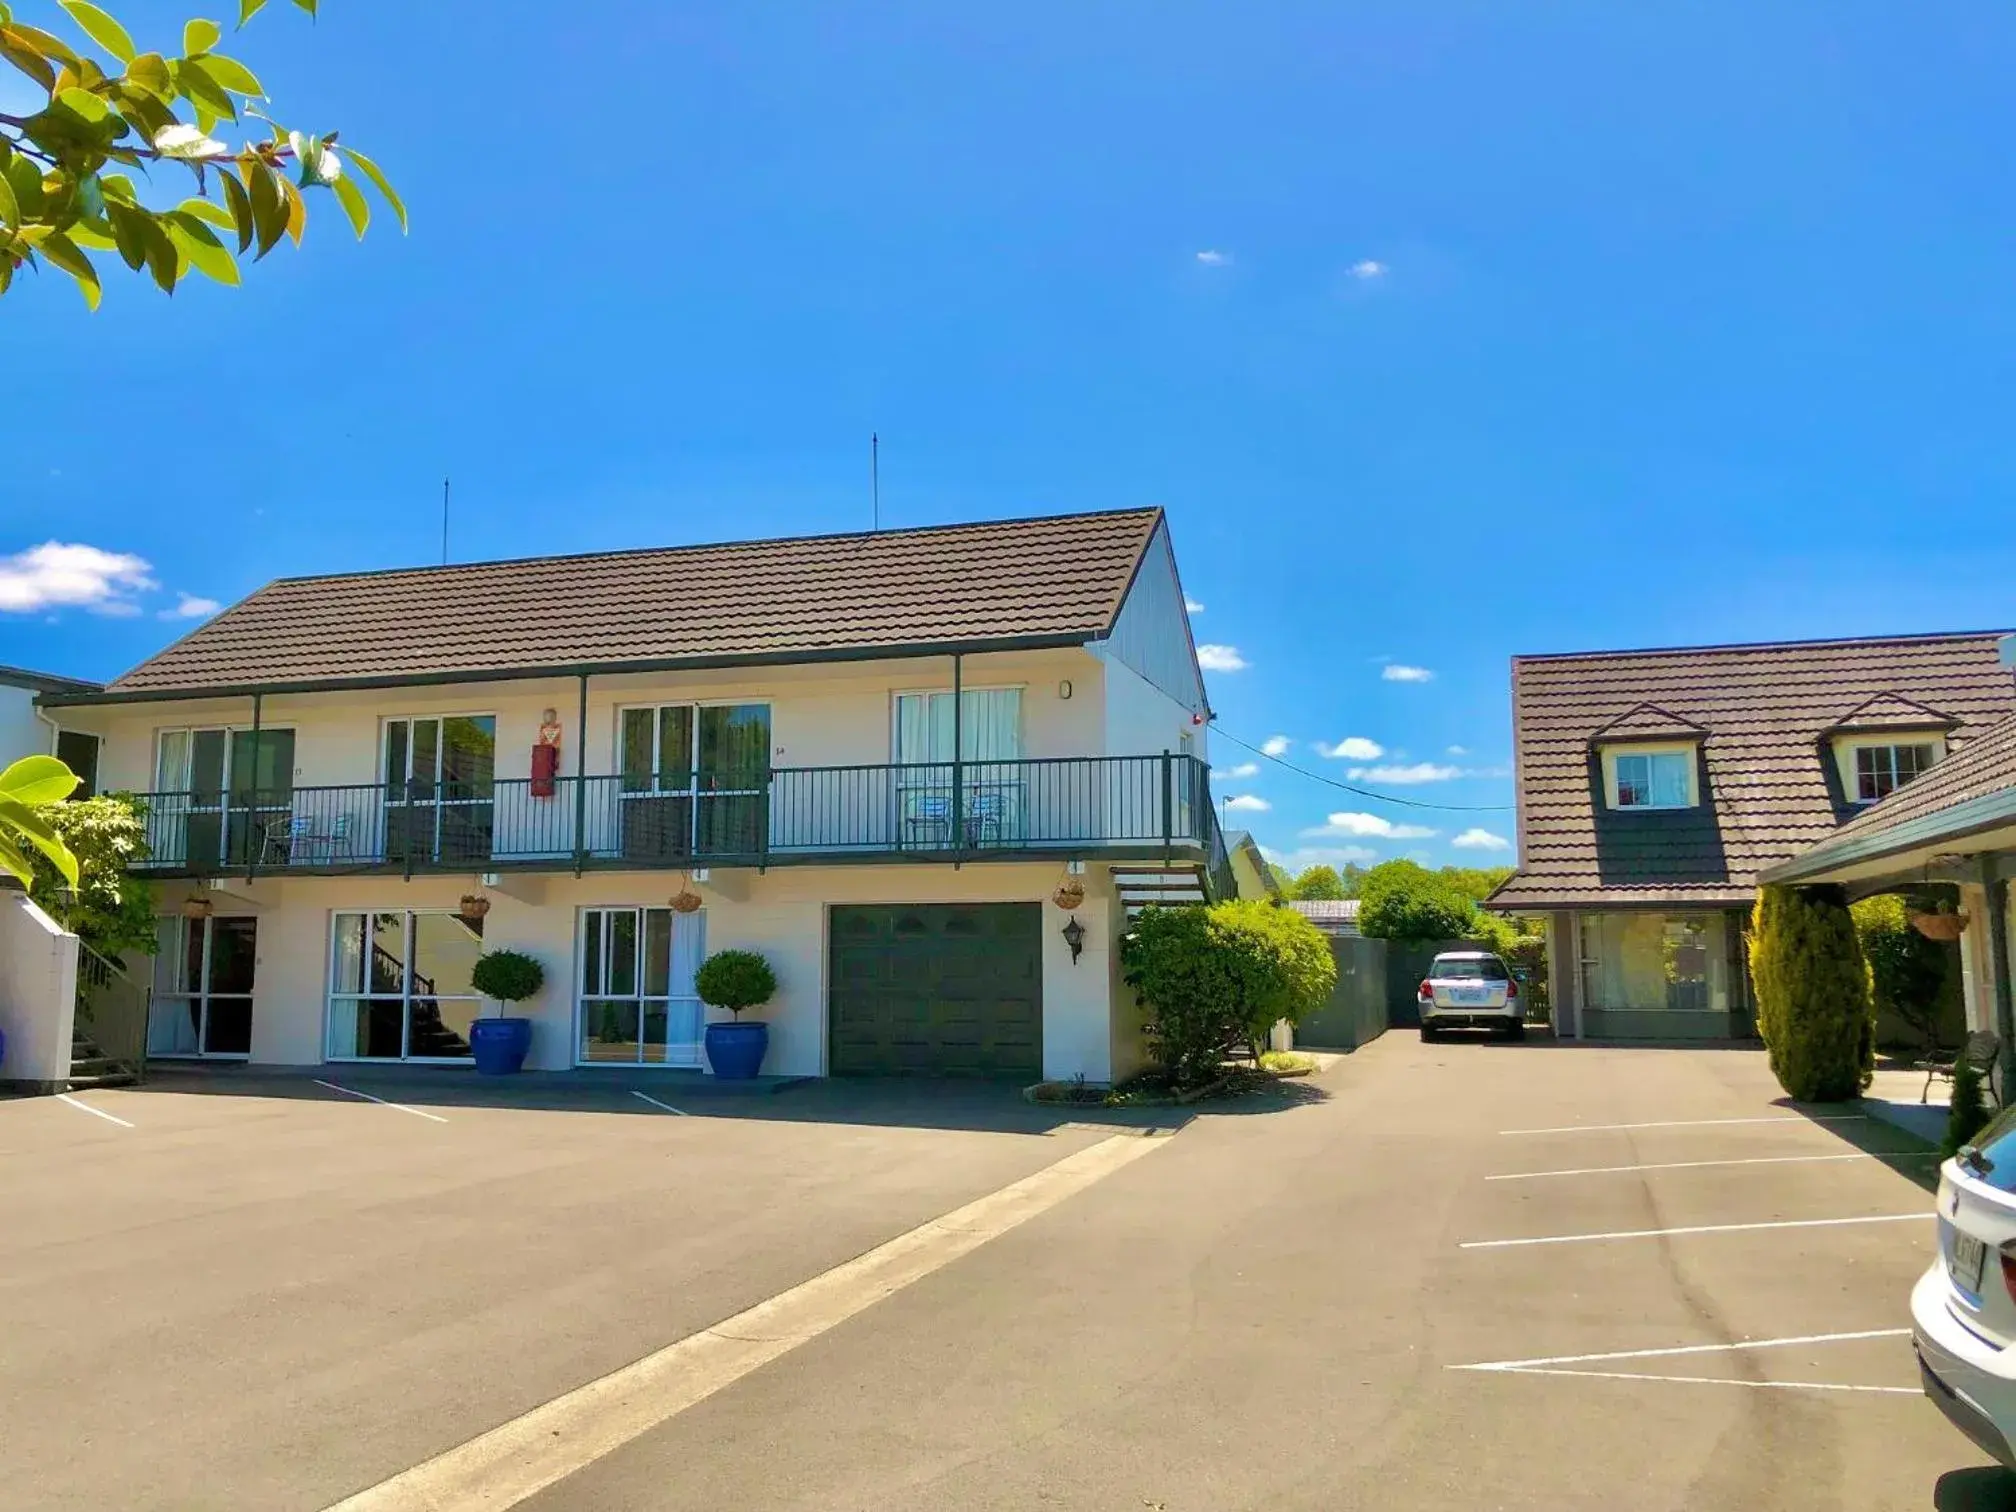 Property Building in Christchurch Motel